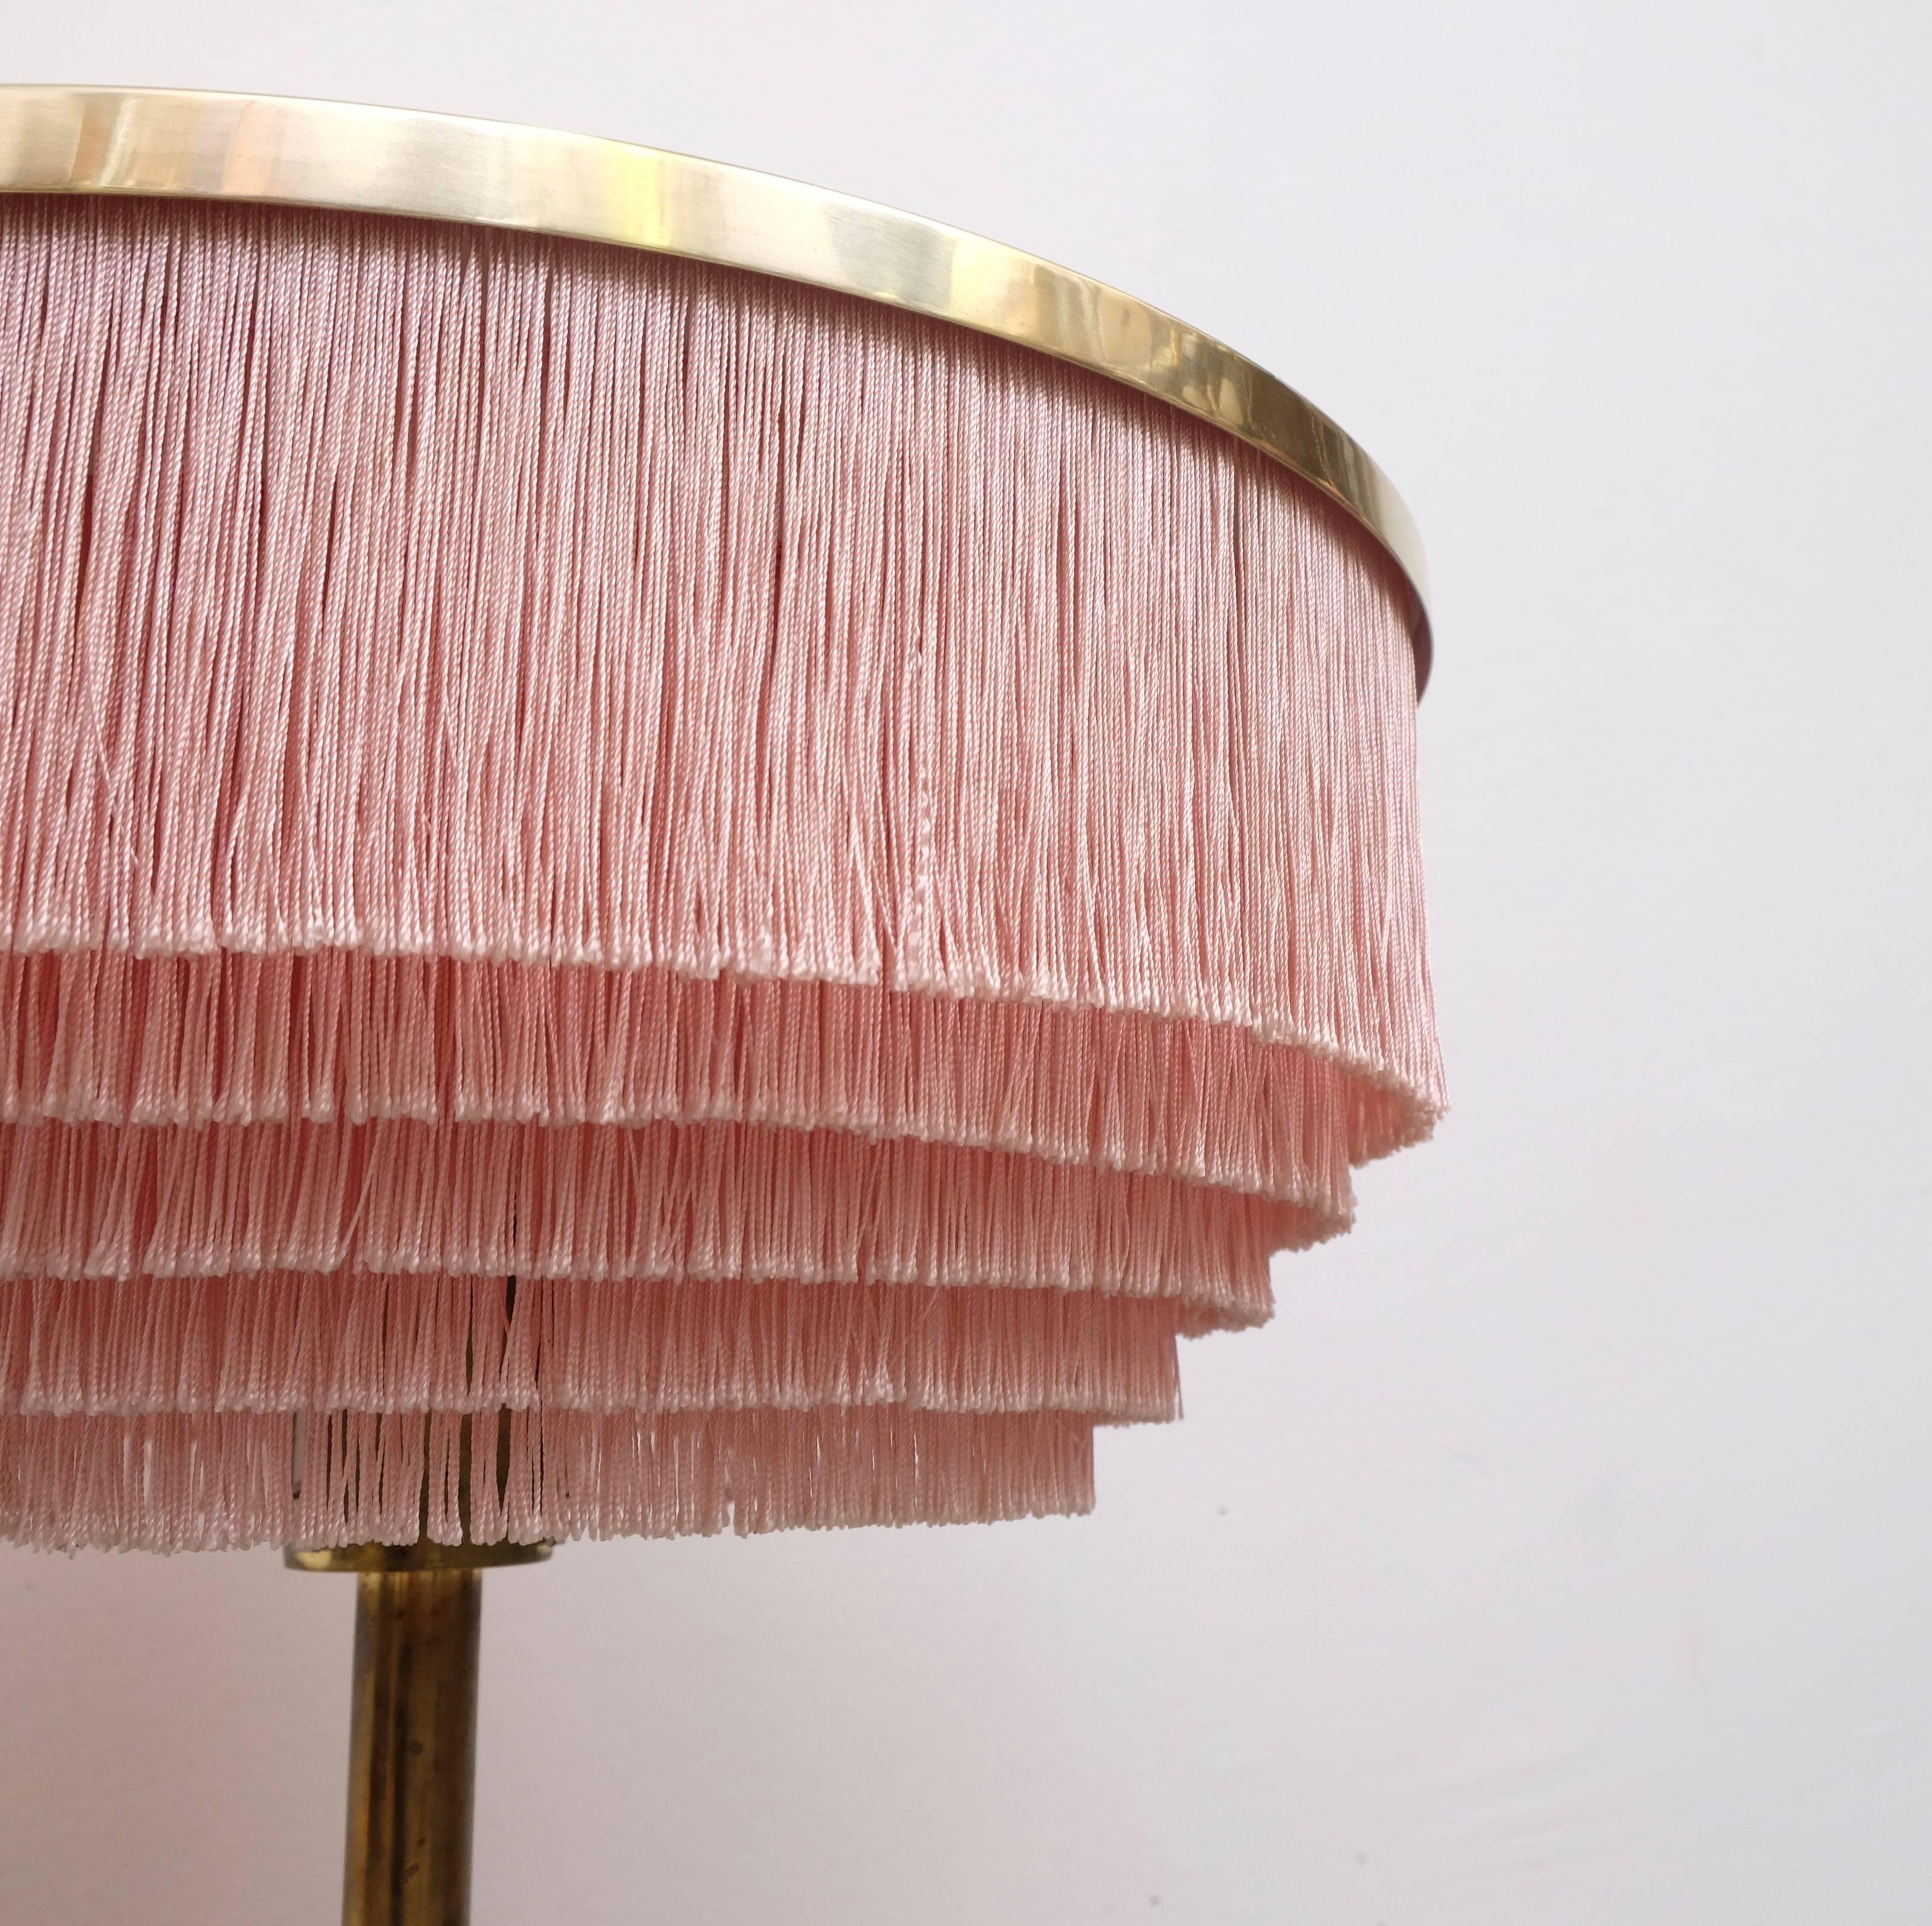 Pink table lamp produced by Hans-Agne Jakobsson in Markaryd, Sweden.
New wiring. Excellent condition.